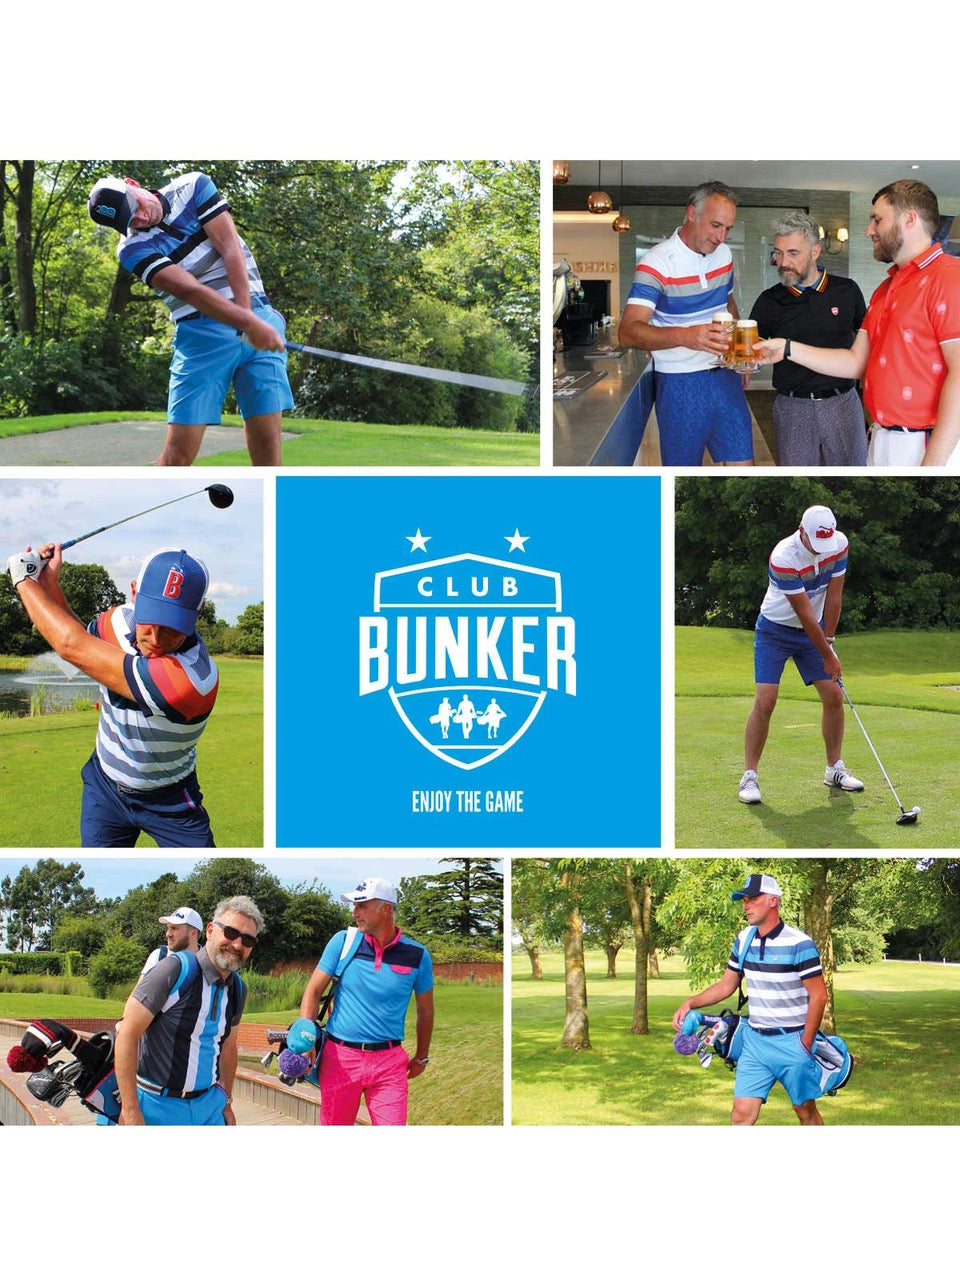 Bunker Mentality Digital Golf Club - Club Bunker annual Membership for unique golf experiences, golf events and savings on Golf clothing